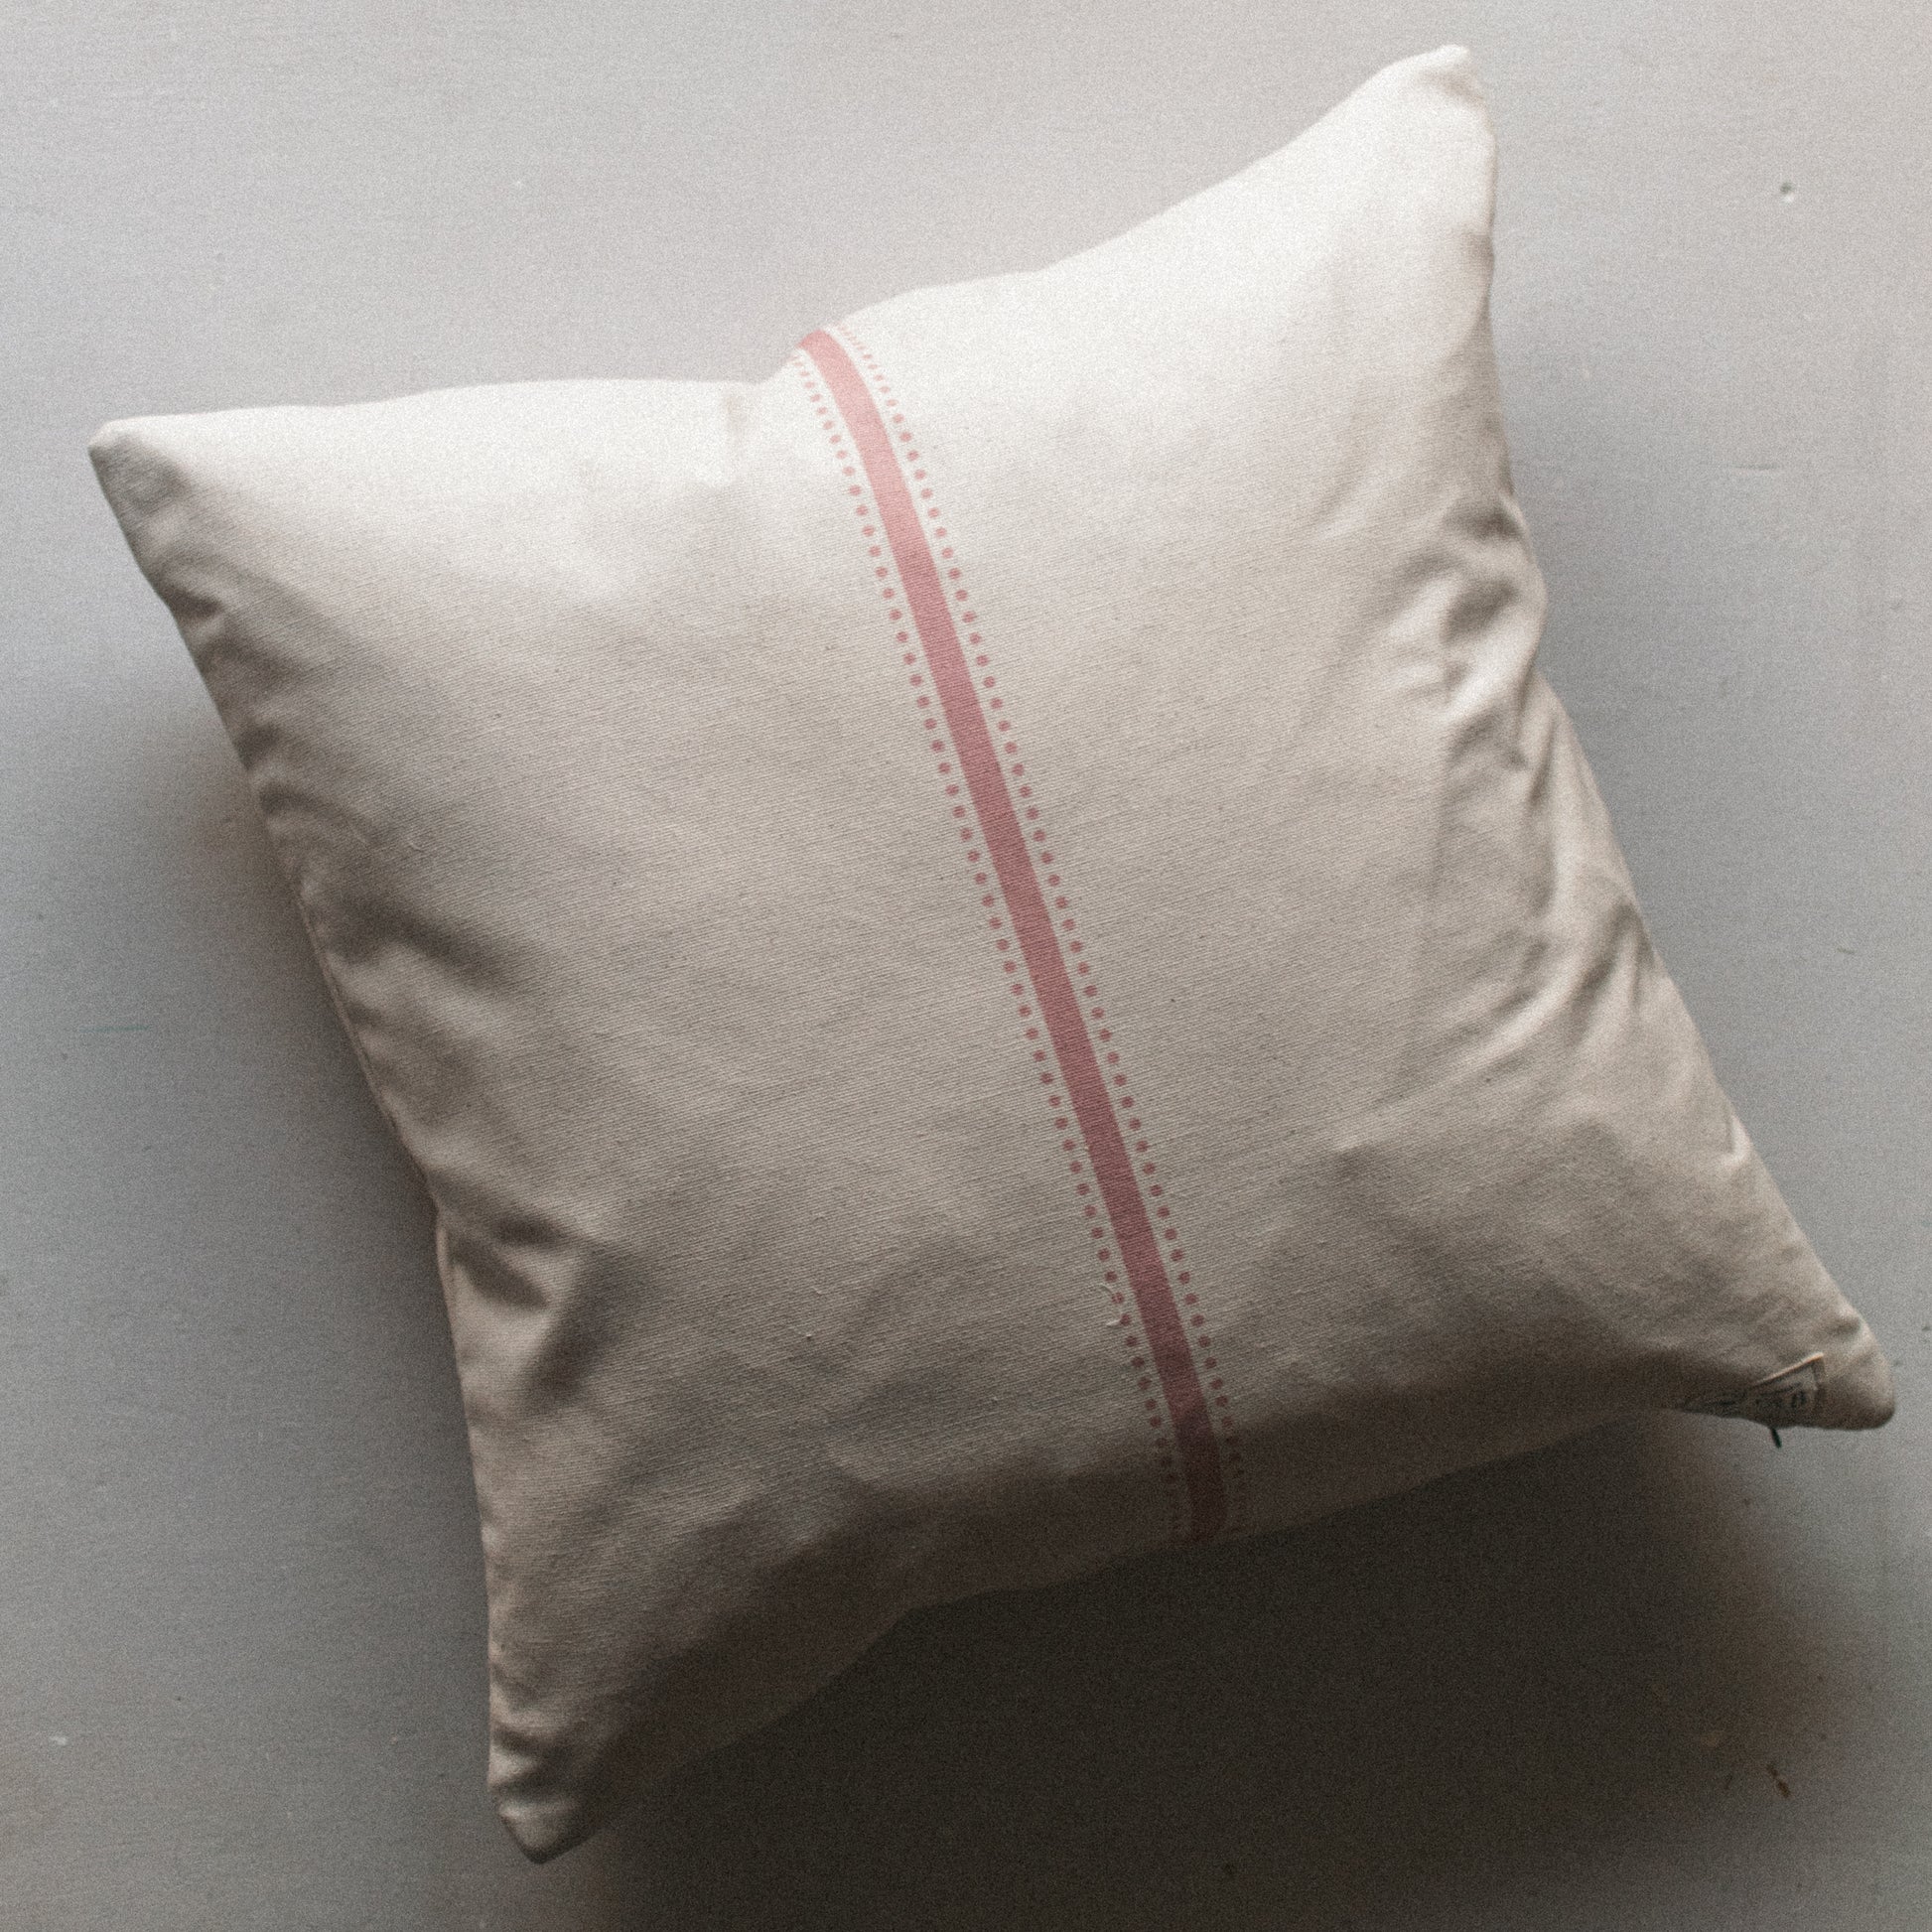 Vintage Style Dot & Stripe Linen Cushion Designed and Made by F&B Crafts